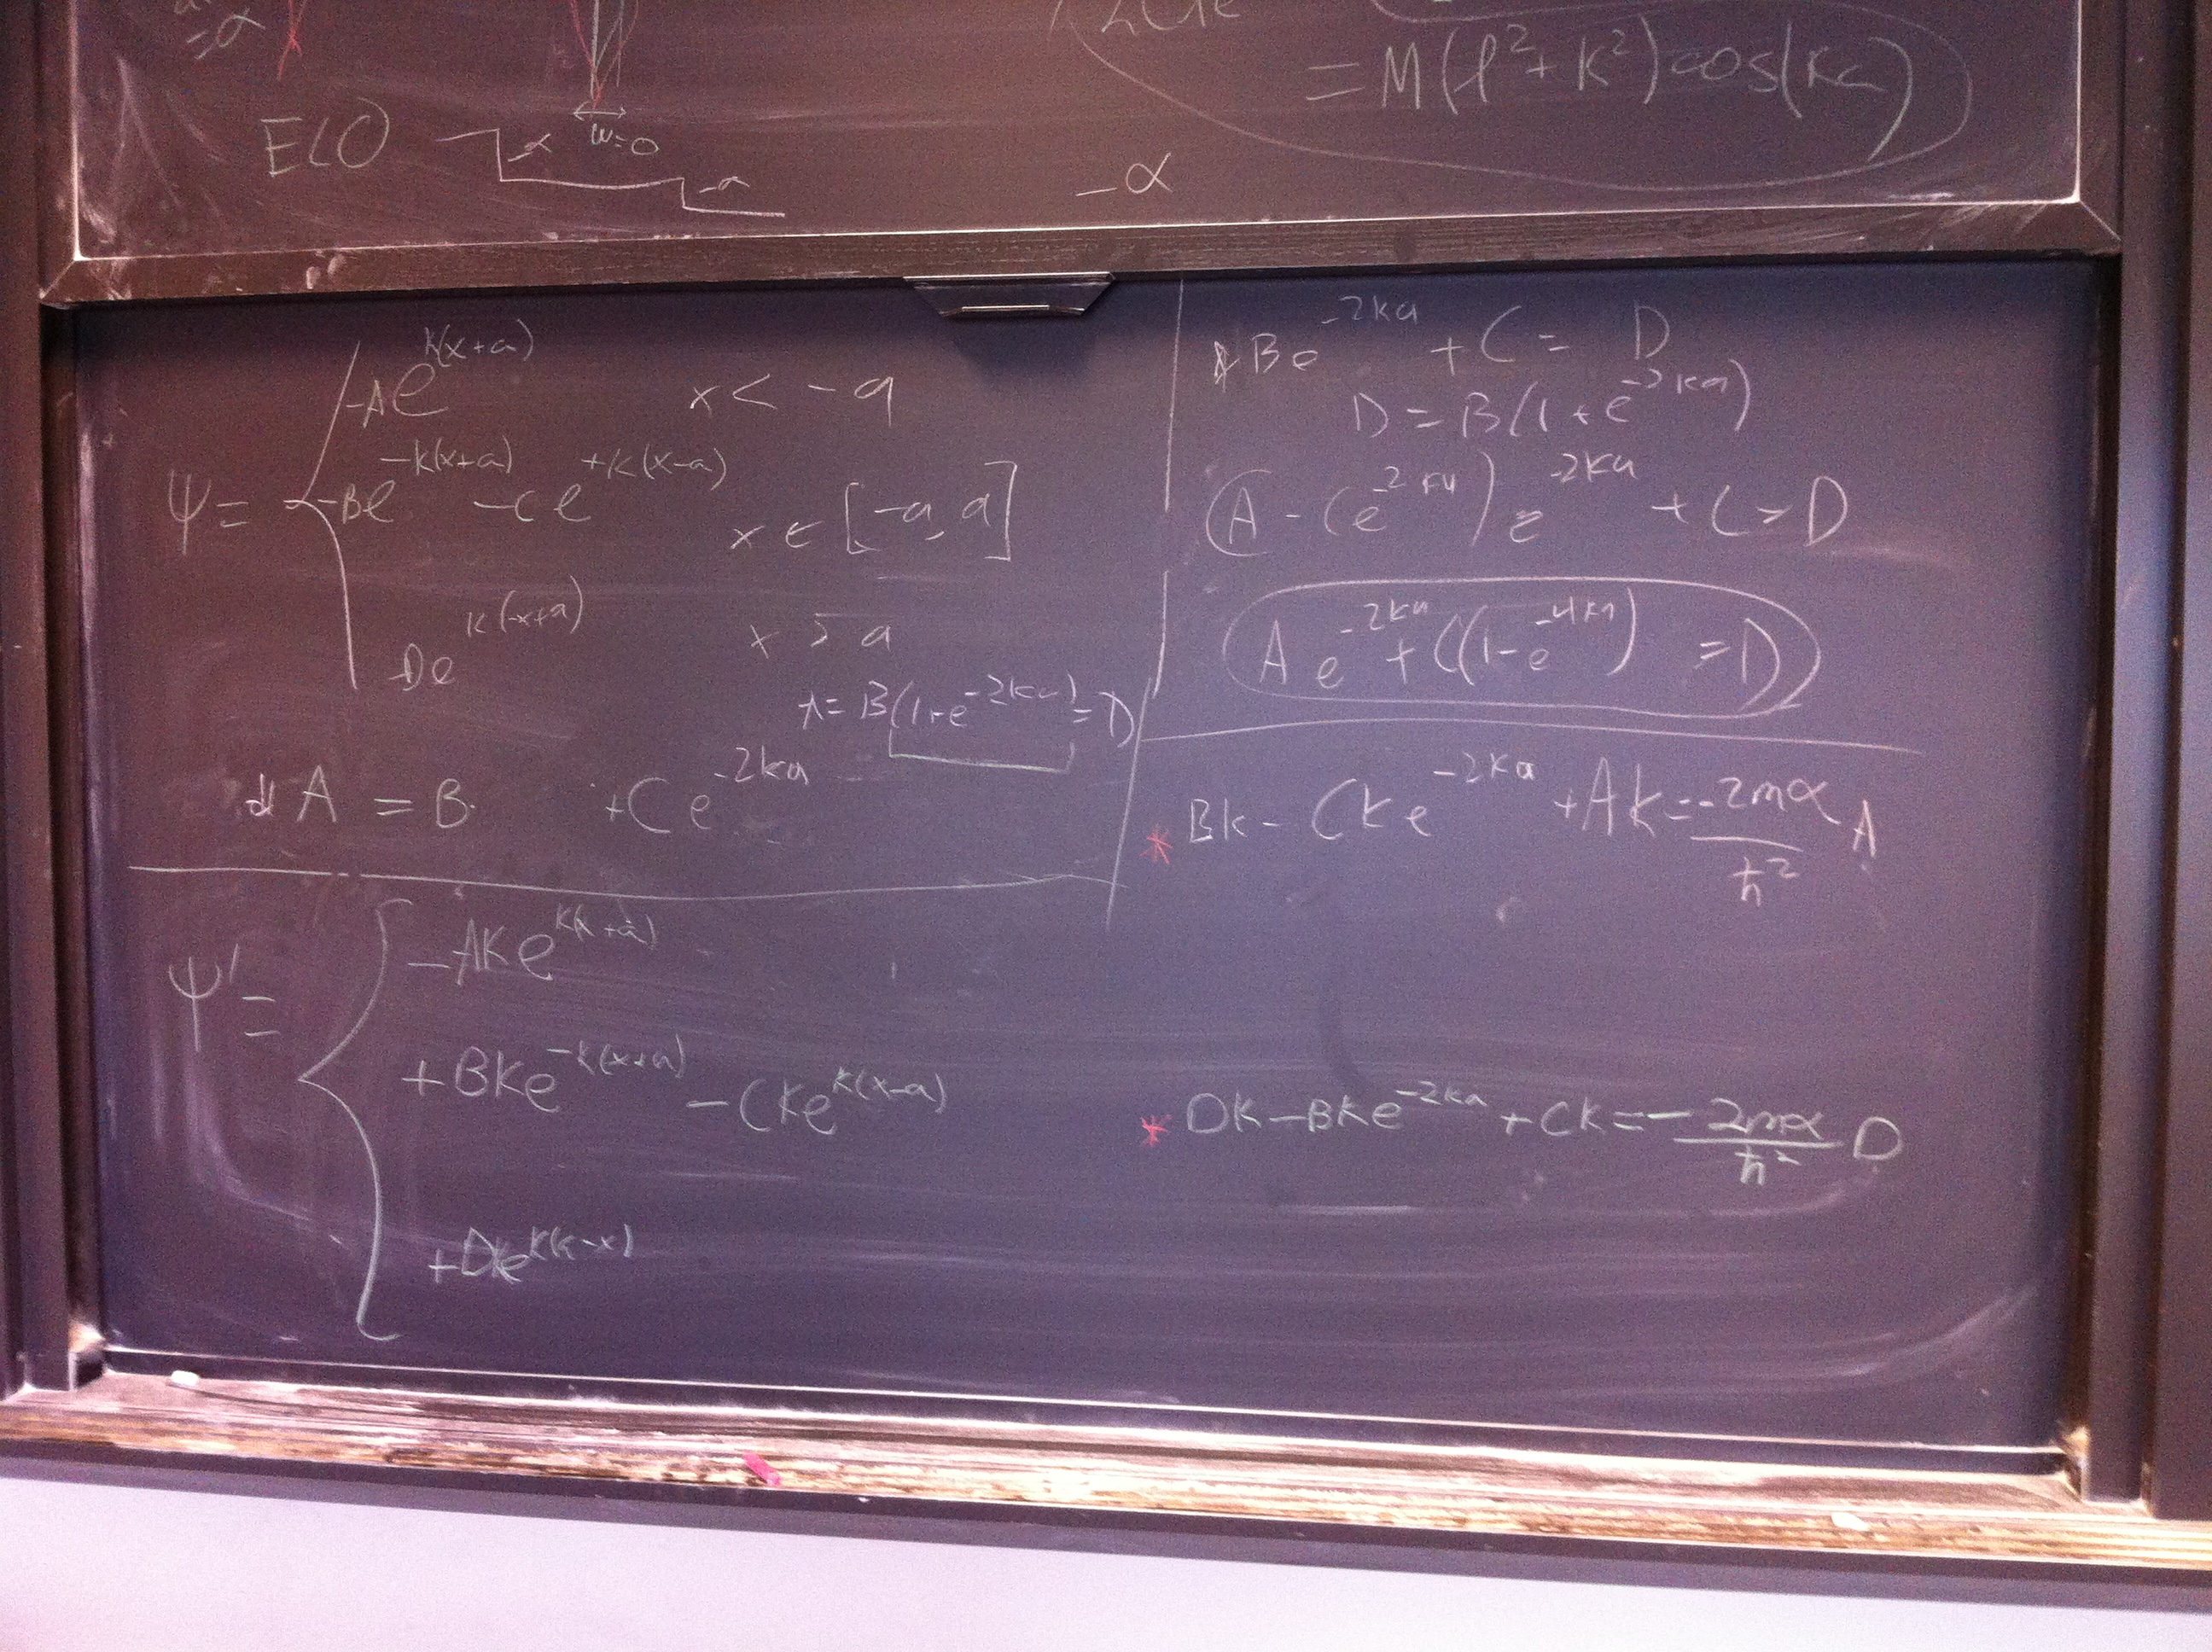 A blackboard with more equations